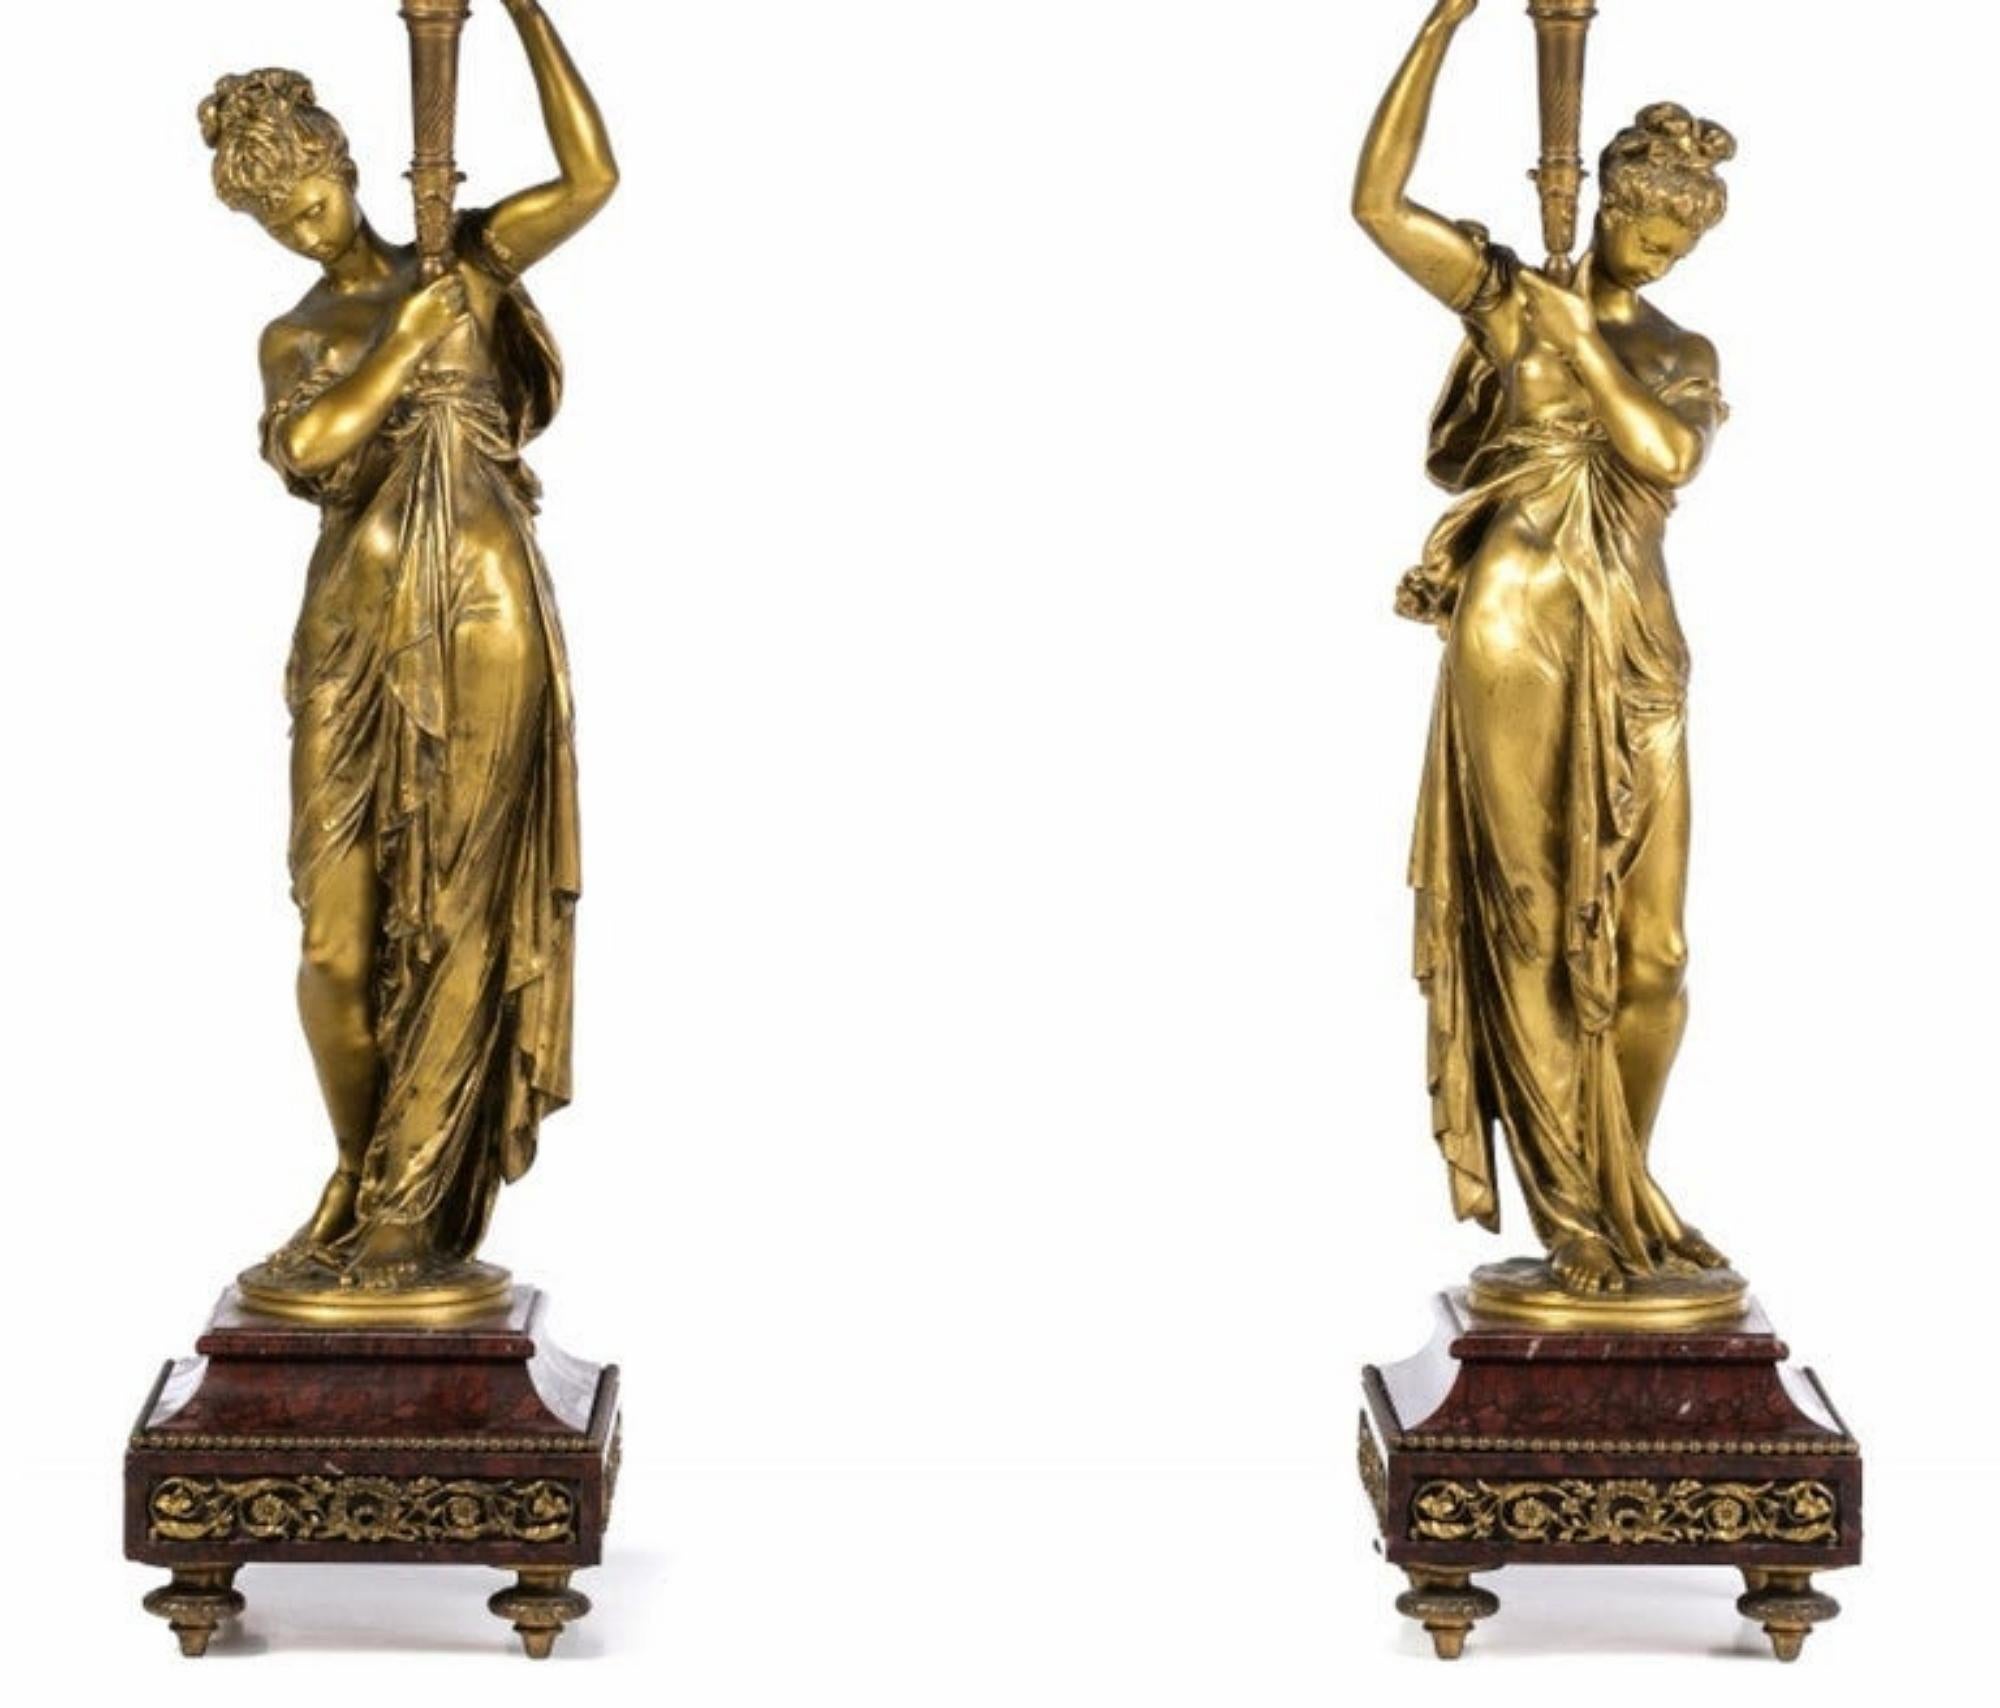 Albert Carrier-Belleuse Pair of French Five-Fire Candelabra, 19th Century For Sale 2